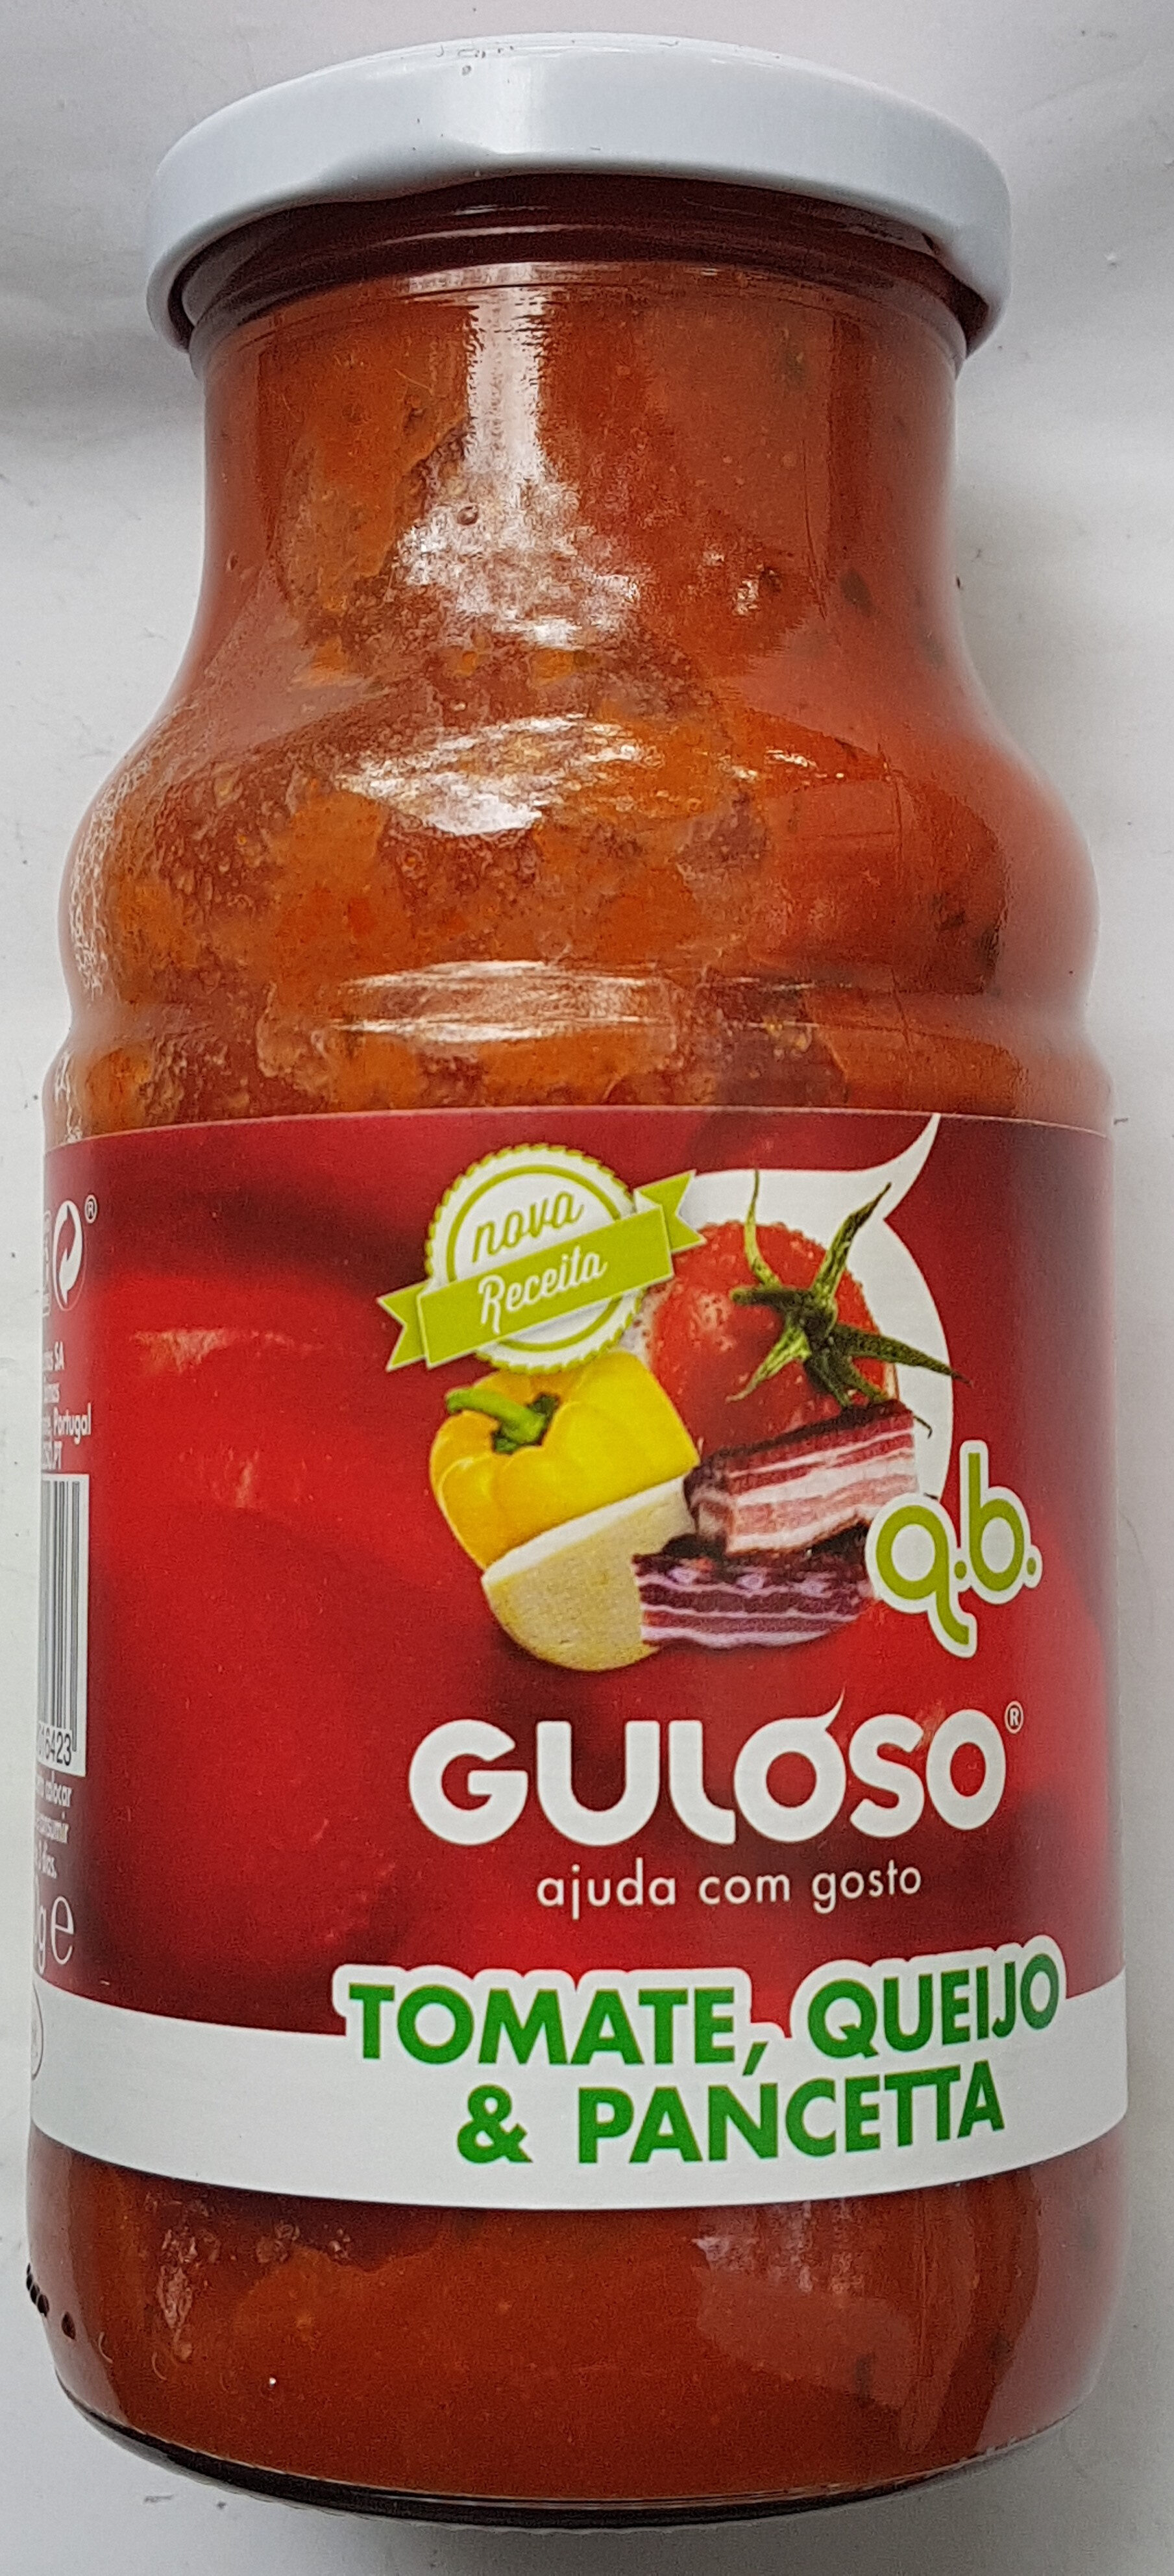 Guloso Tomate, Queijo & Pancetta - Product - fr